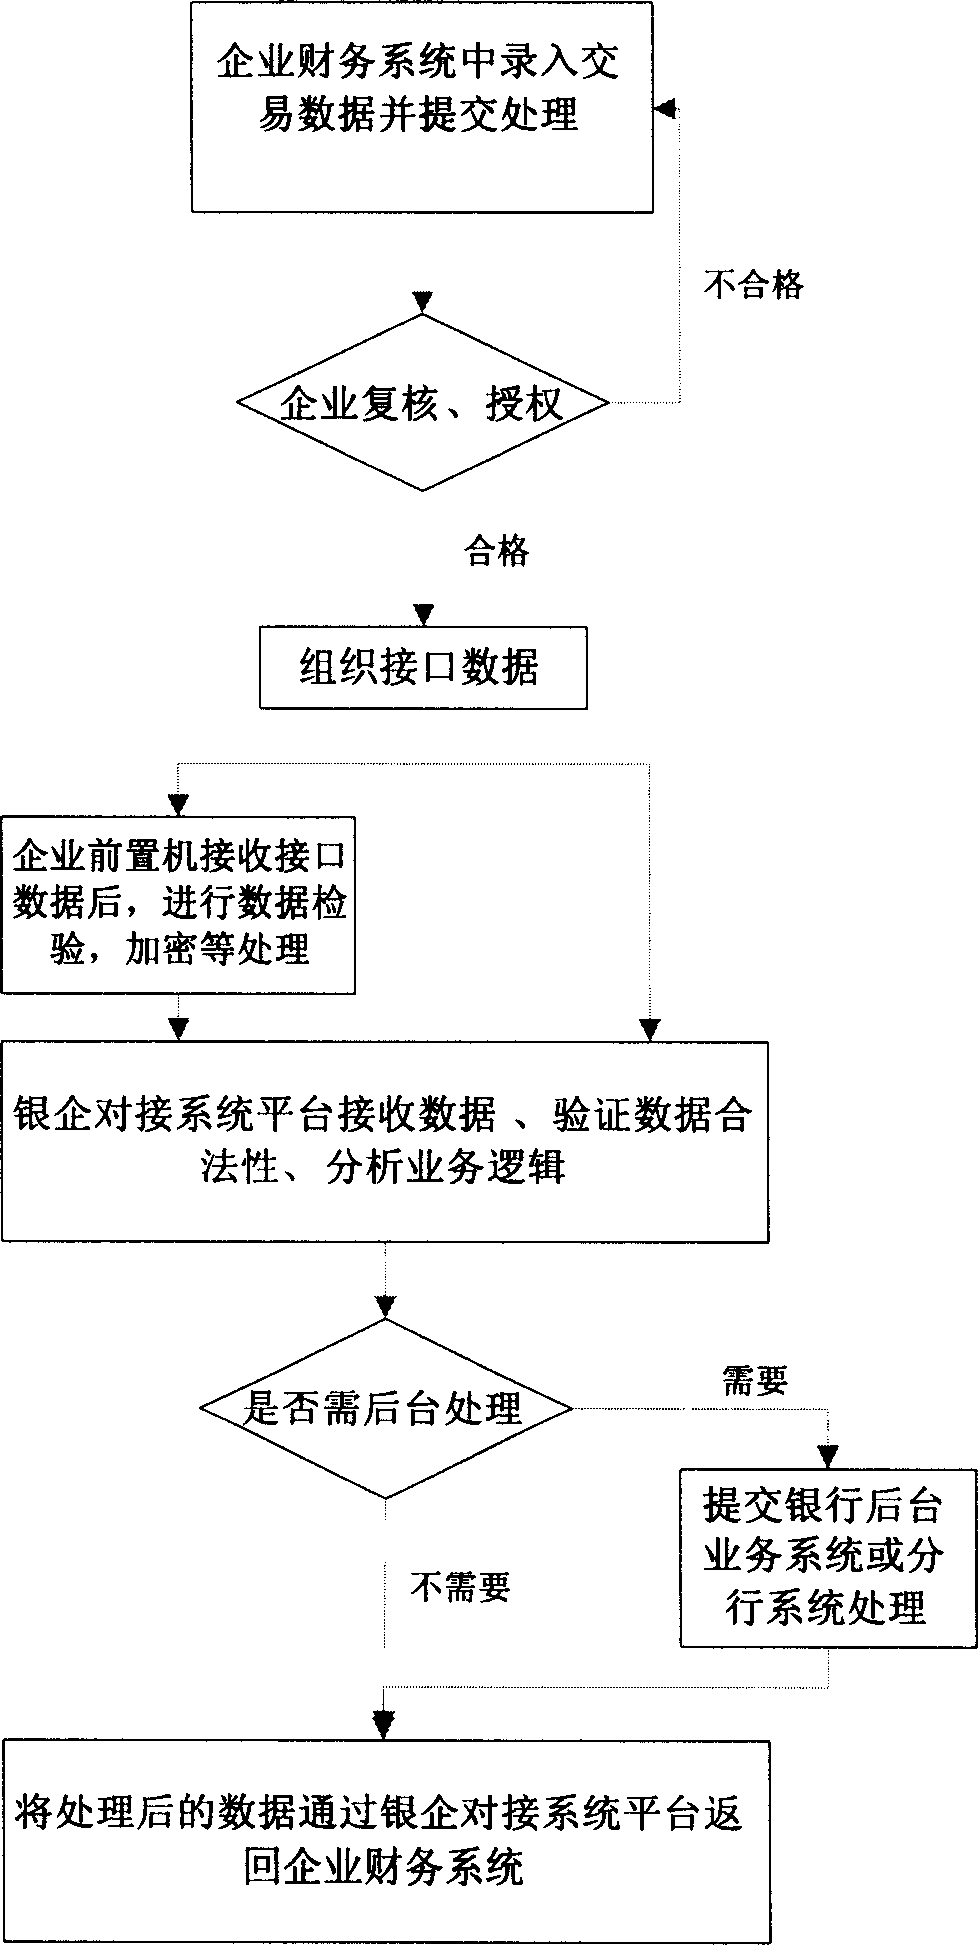 Processing system between enterprise and bank service abutting joint